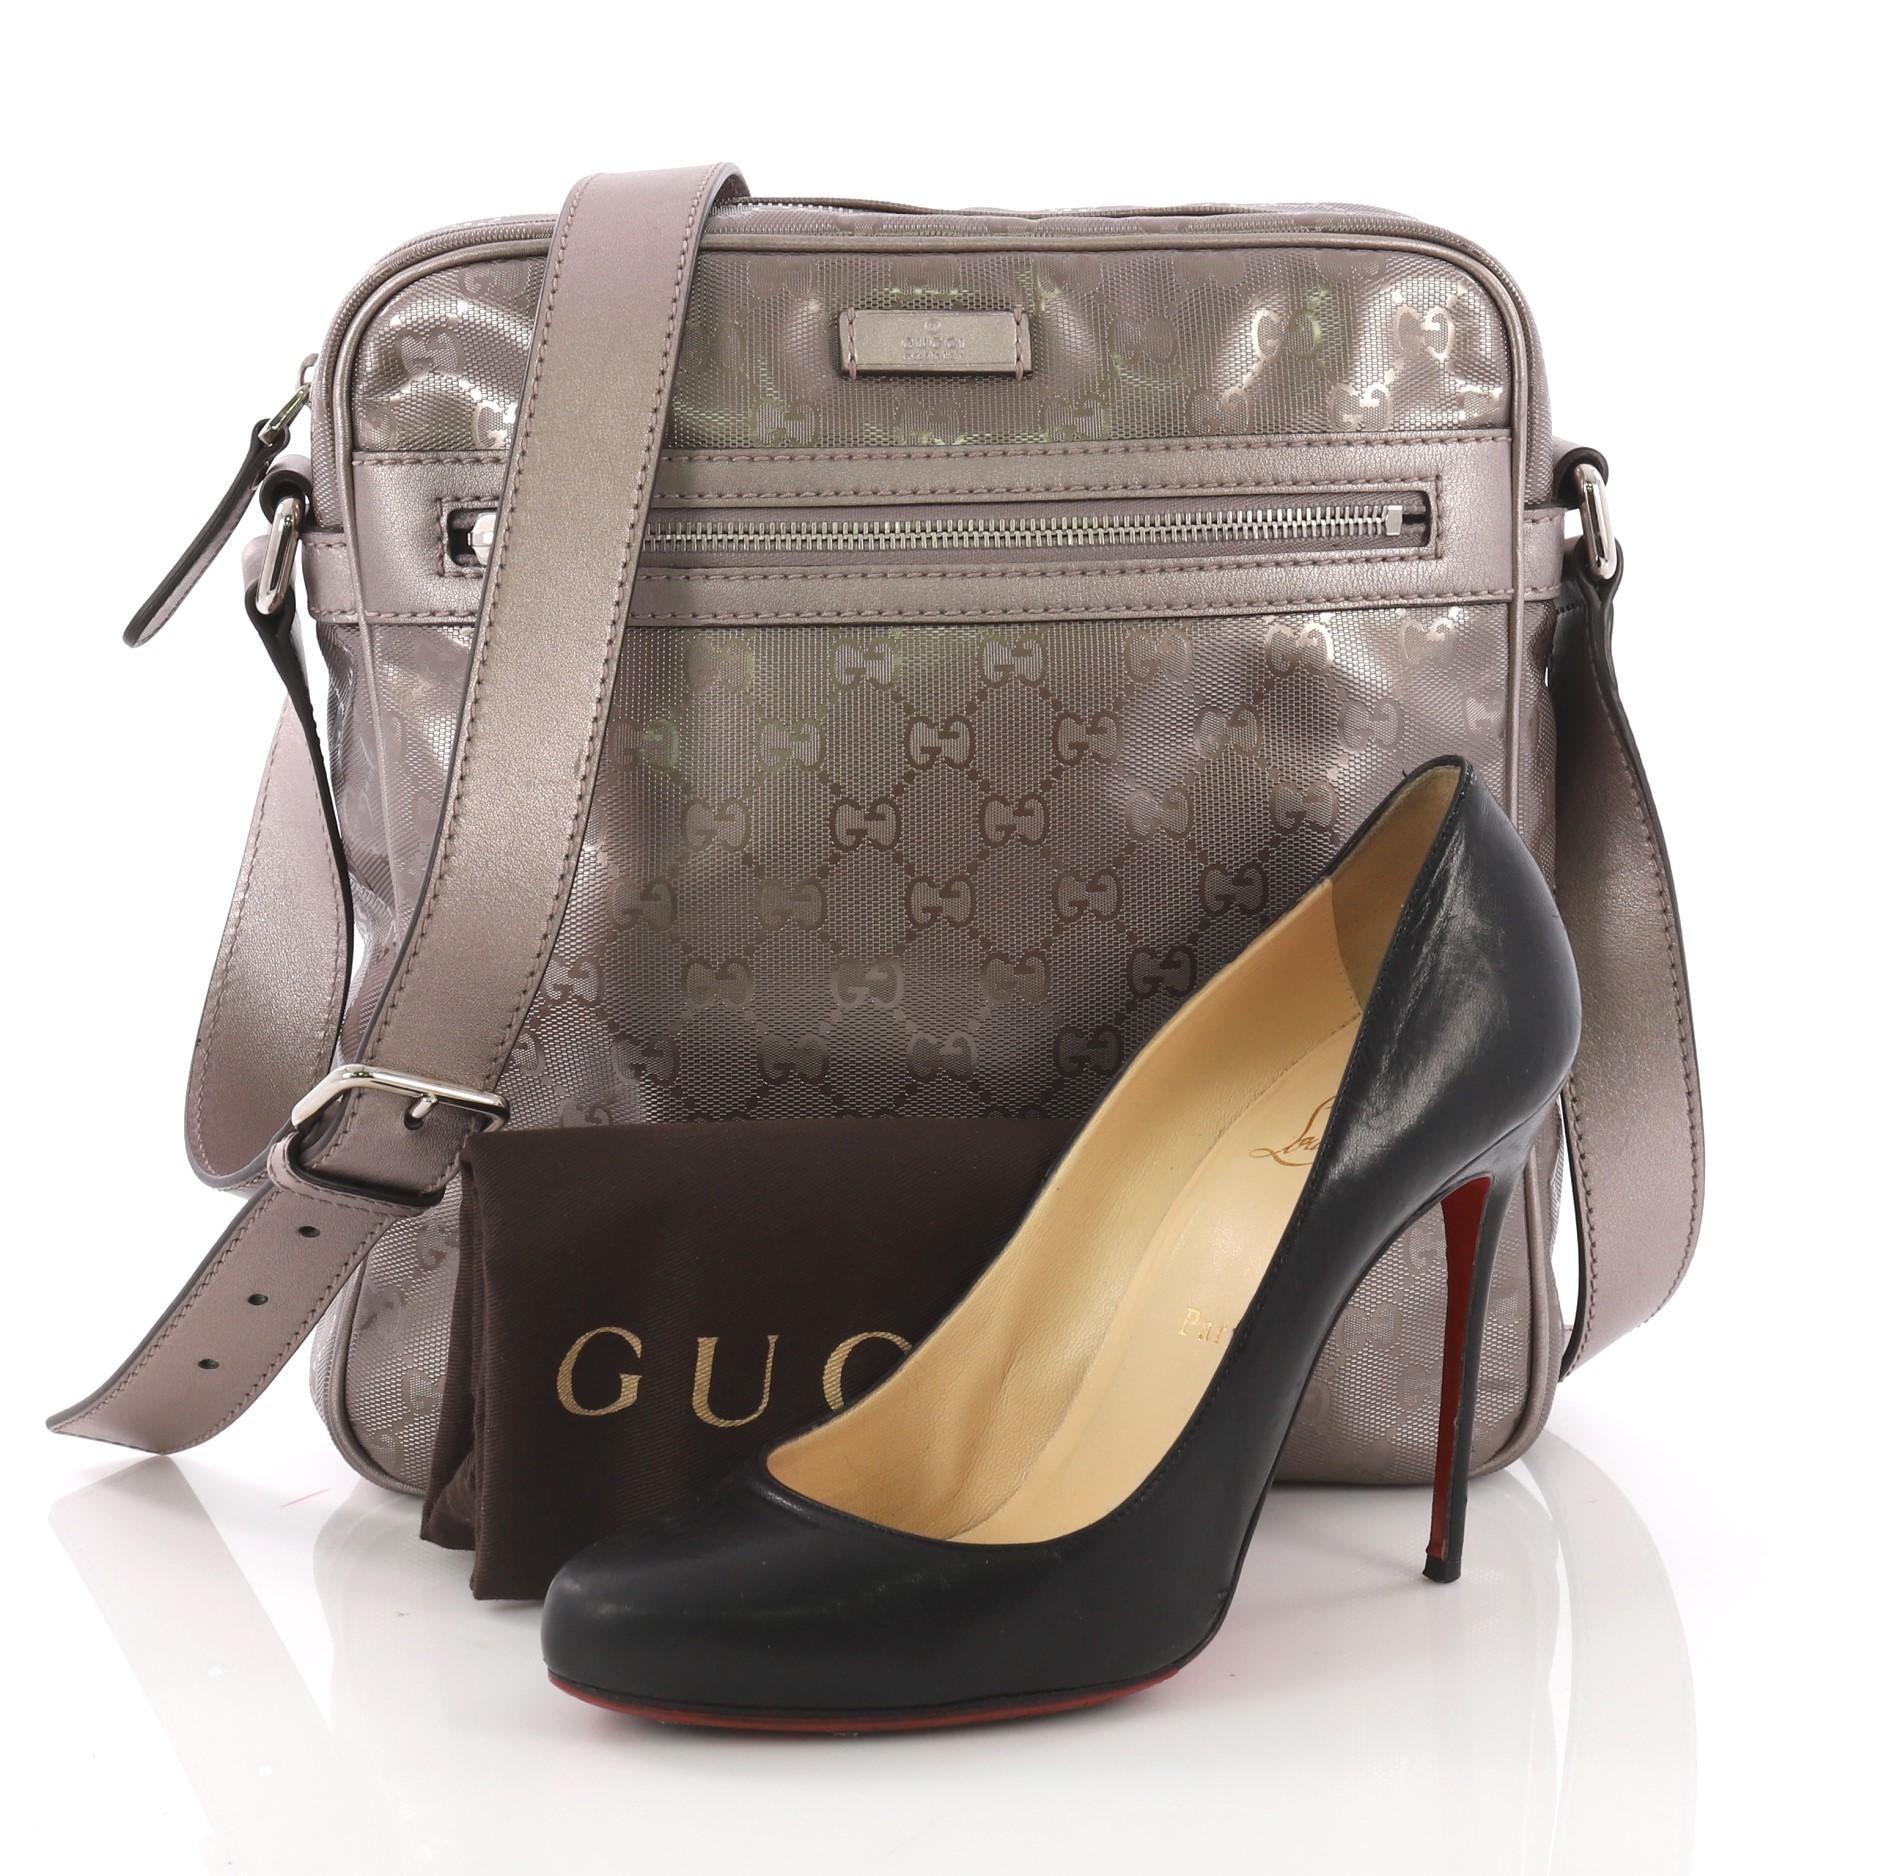 This Gucci Zip Crossbody Bag GG Imprime Medium, crafted taupe metallic GG imprime, features sturdy shoulder strap, exterior front zip pocket and silver-tone hardware. Its zip pocket opens to a black fabric interior with zip and slip pockets. **Note: